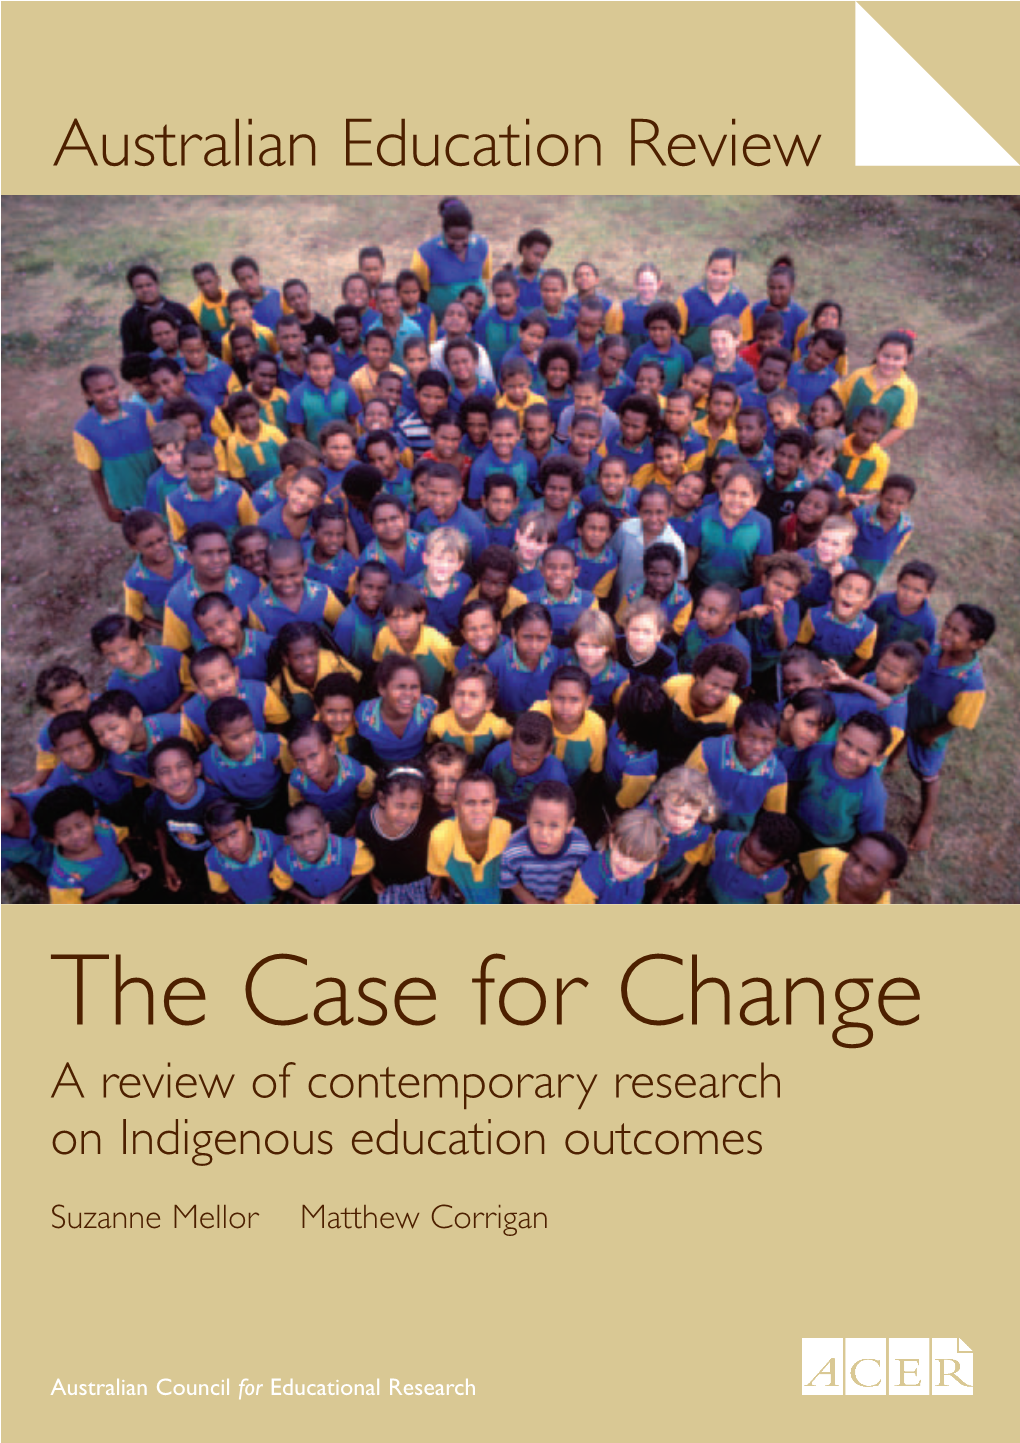 A Review of Contemporary Research on Indigenous Education Outcomes